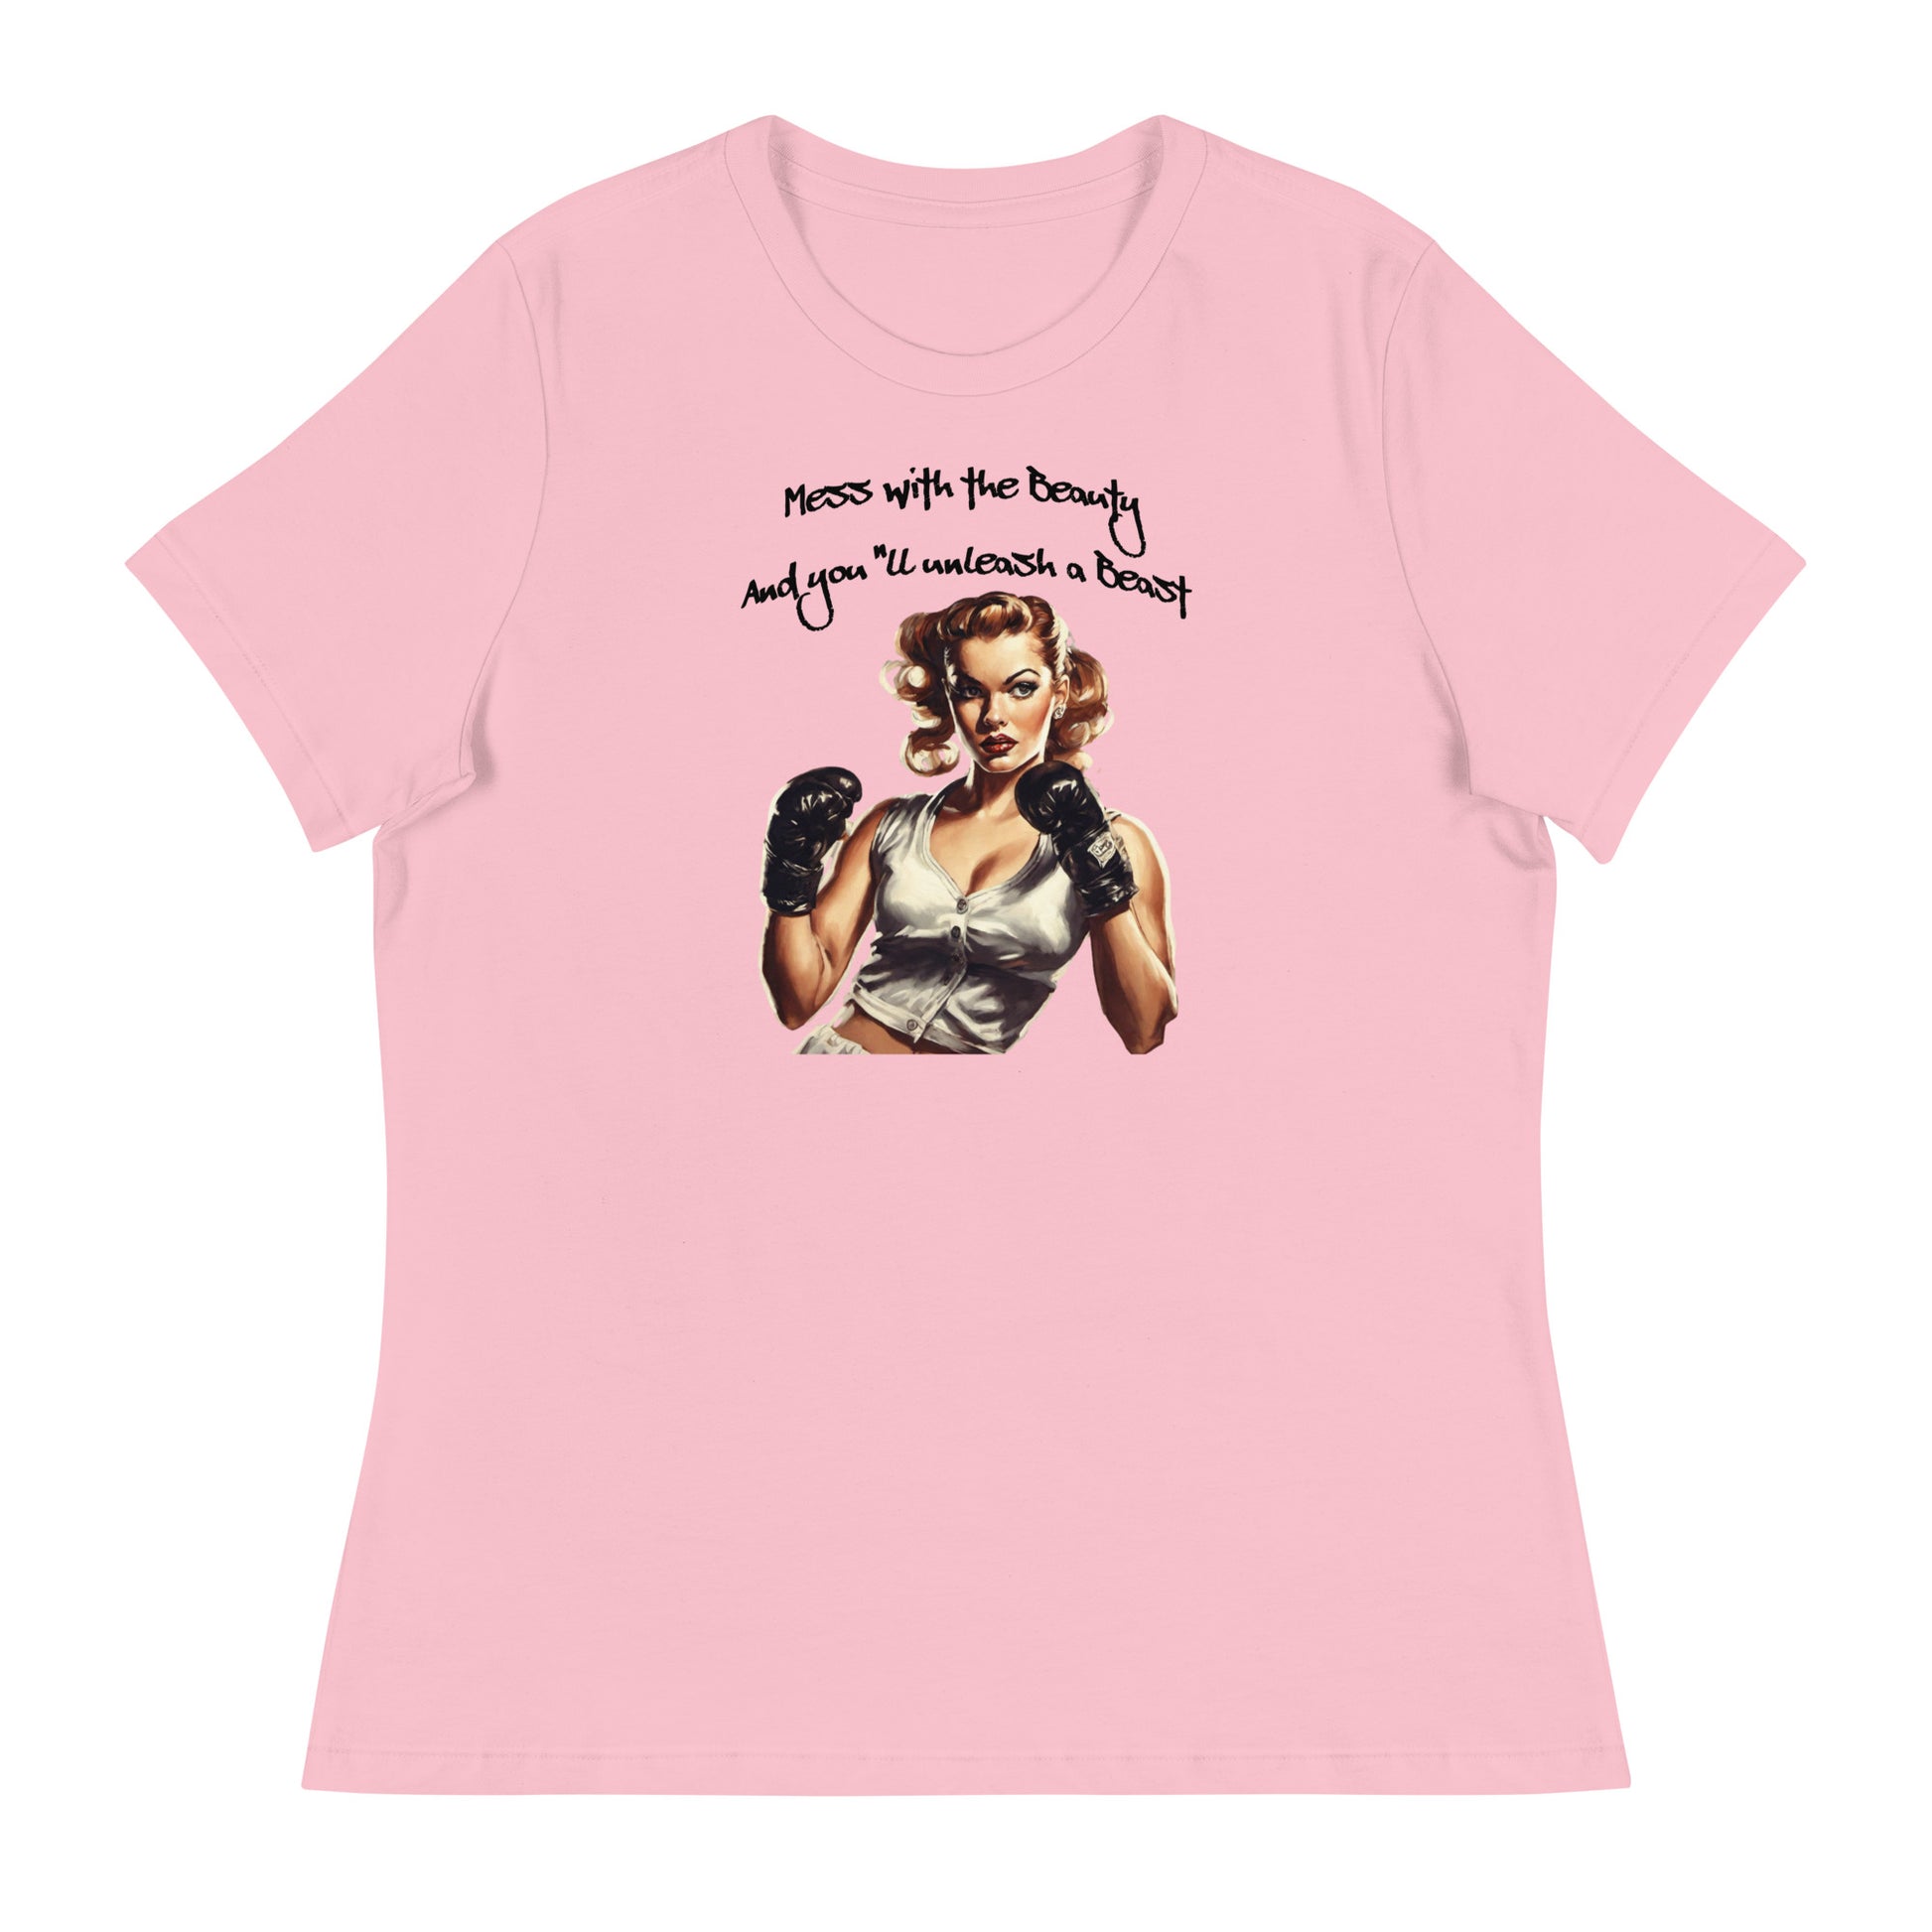 Mess with the Beauty, Unleash the Beast Women's Strength T-Shirt Pink